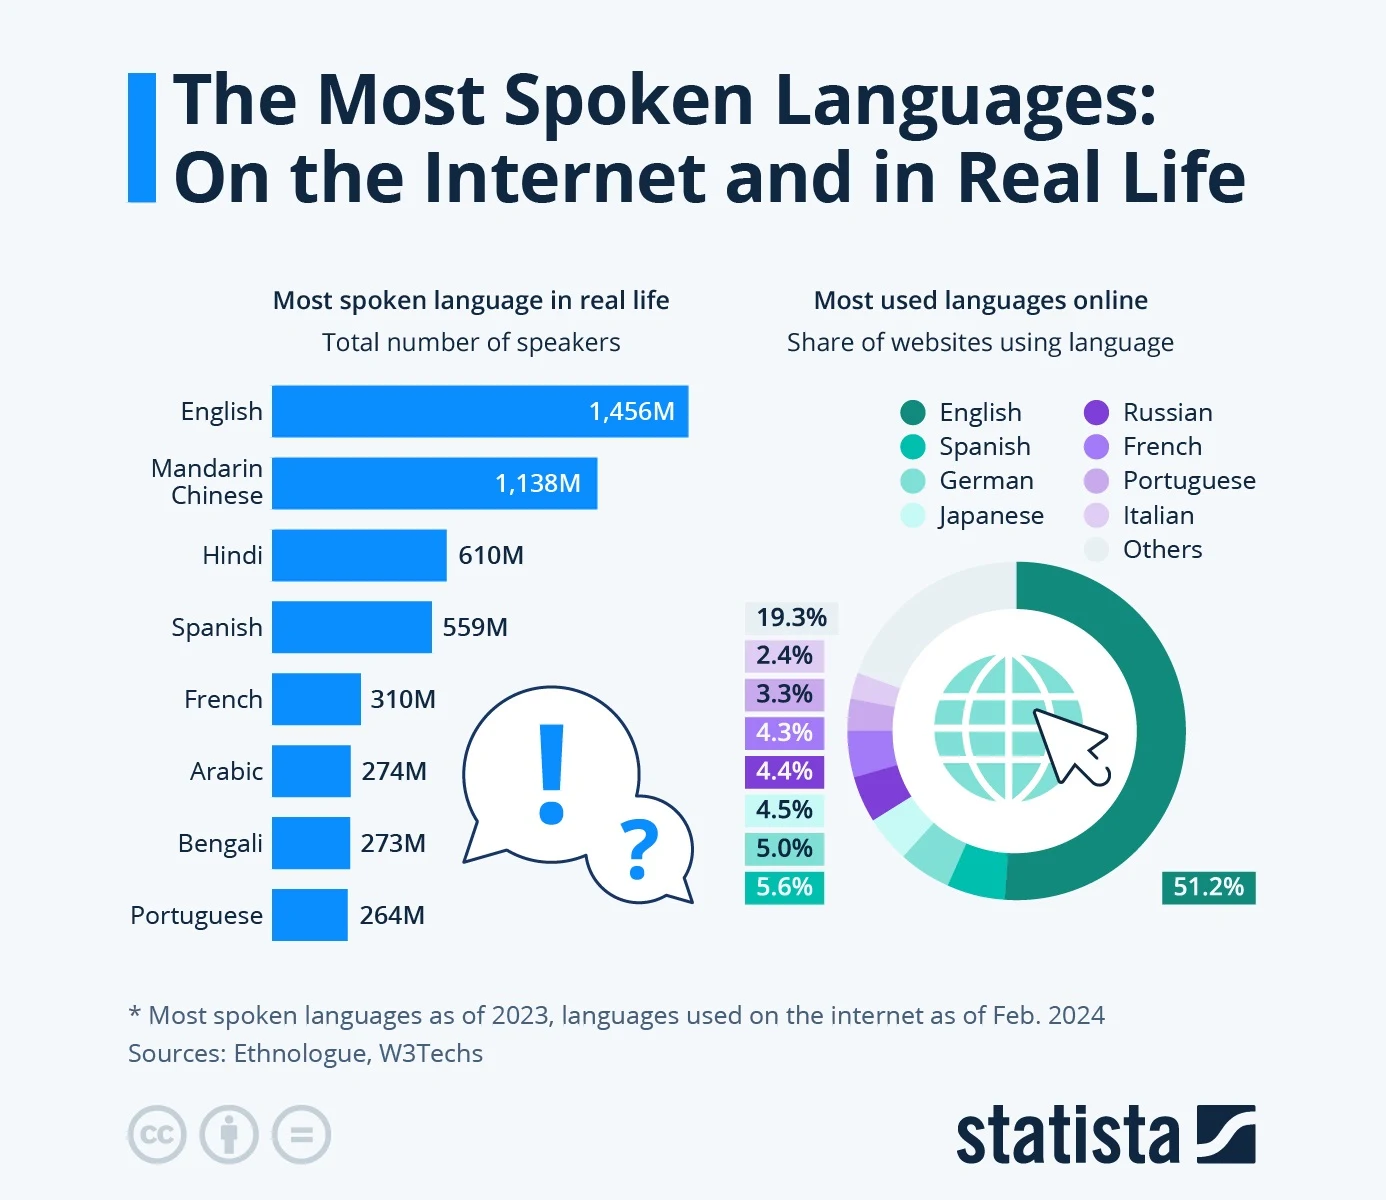 The Most Spoken Languages: On the Internet and in Real Life